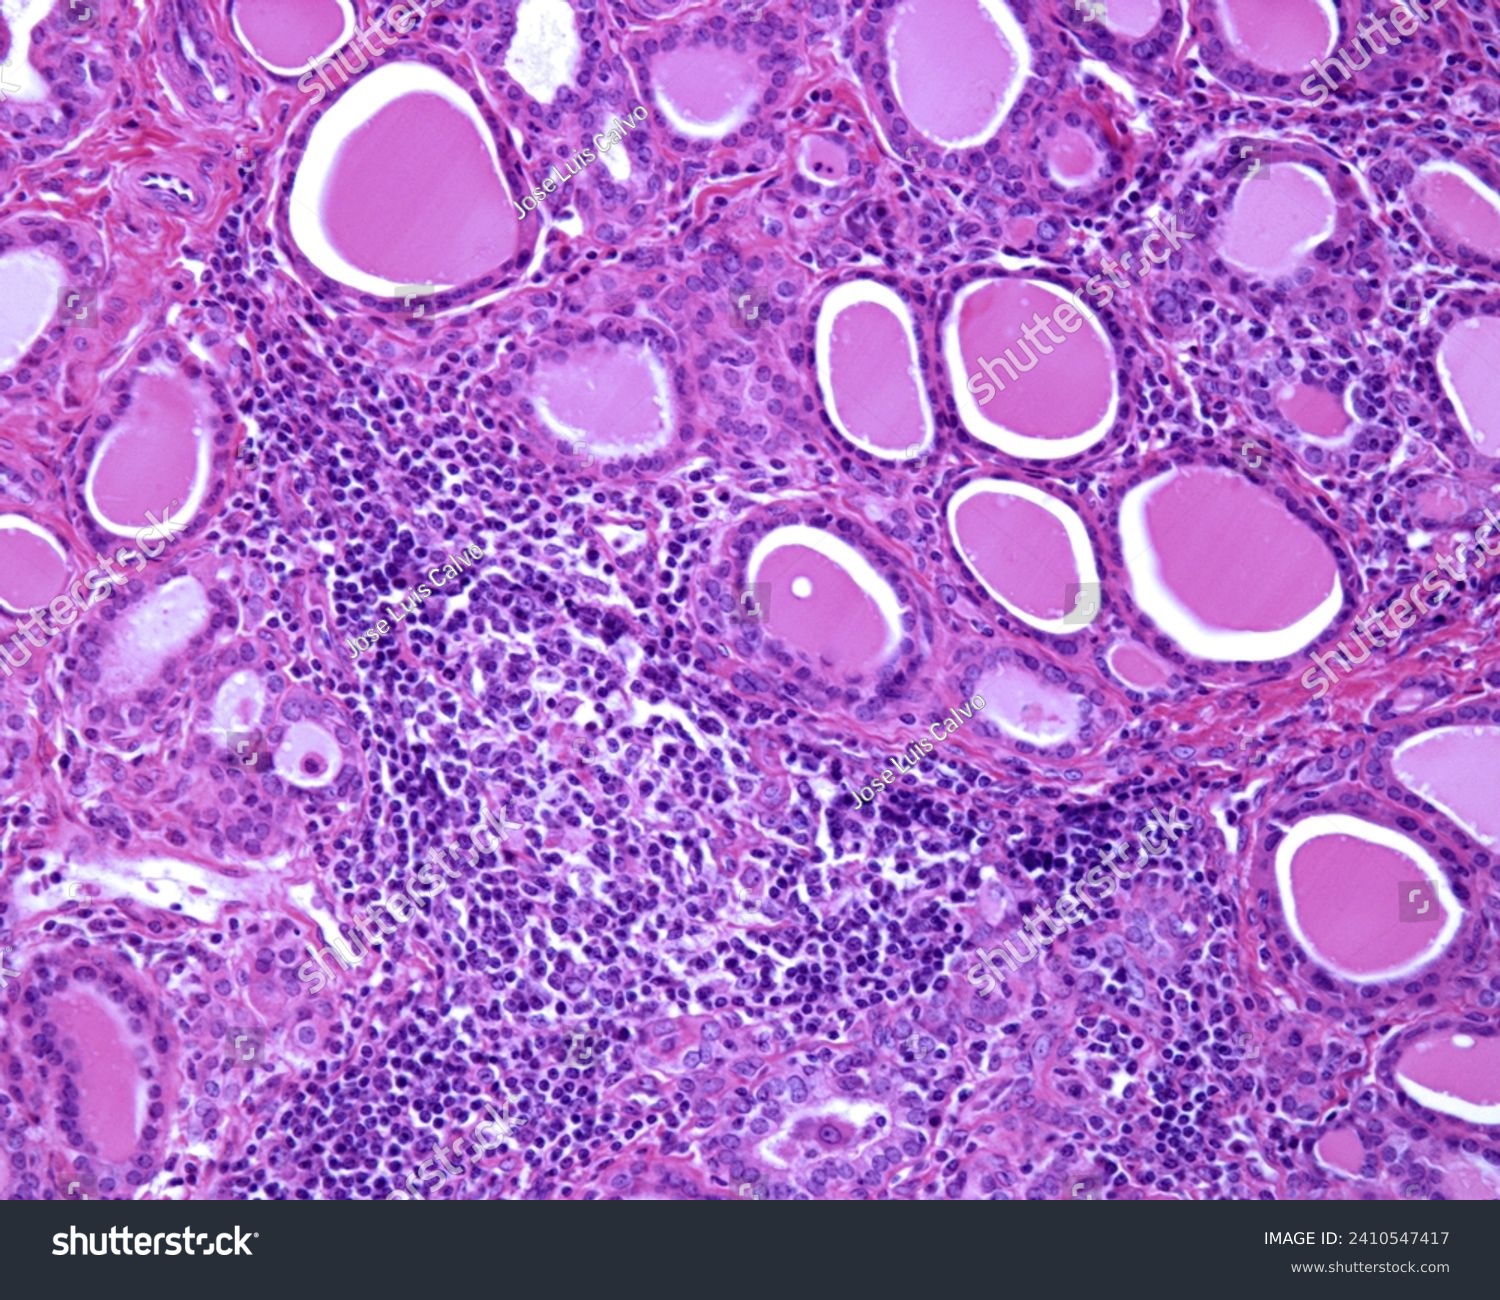 Light micrograph of a human thyroid with chronic thyroiditis (Hashimoto disease). There are extensive chronic inflammatory infiltrates and lymphoid follicles with germinal centres. #2410547417